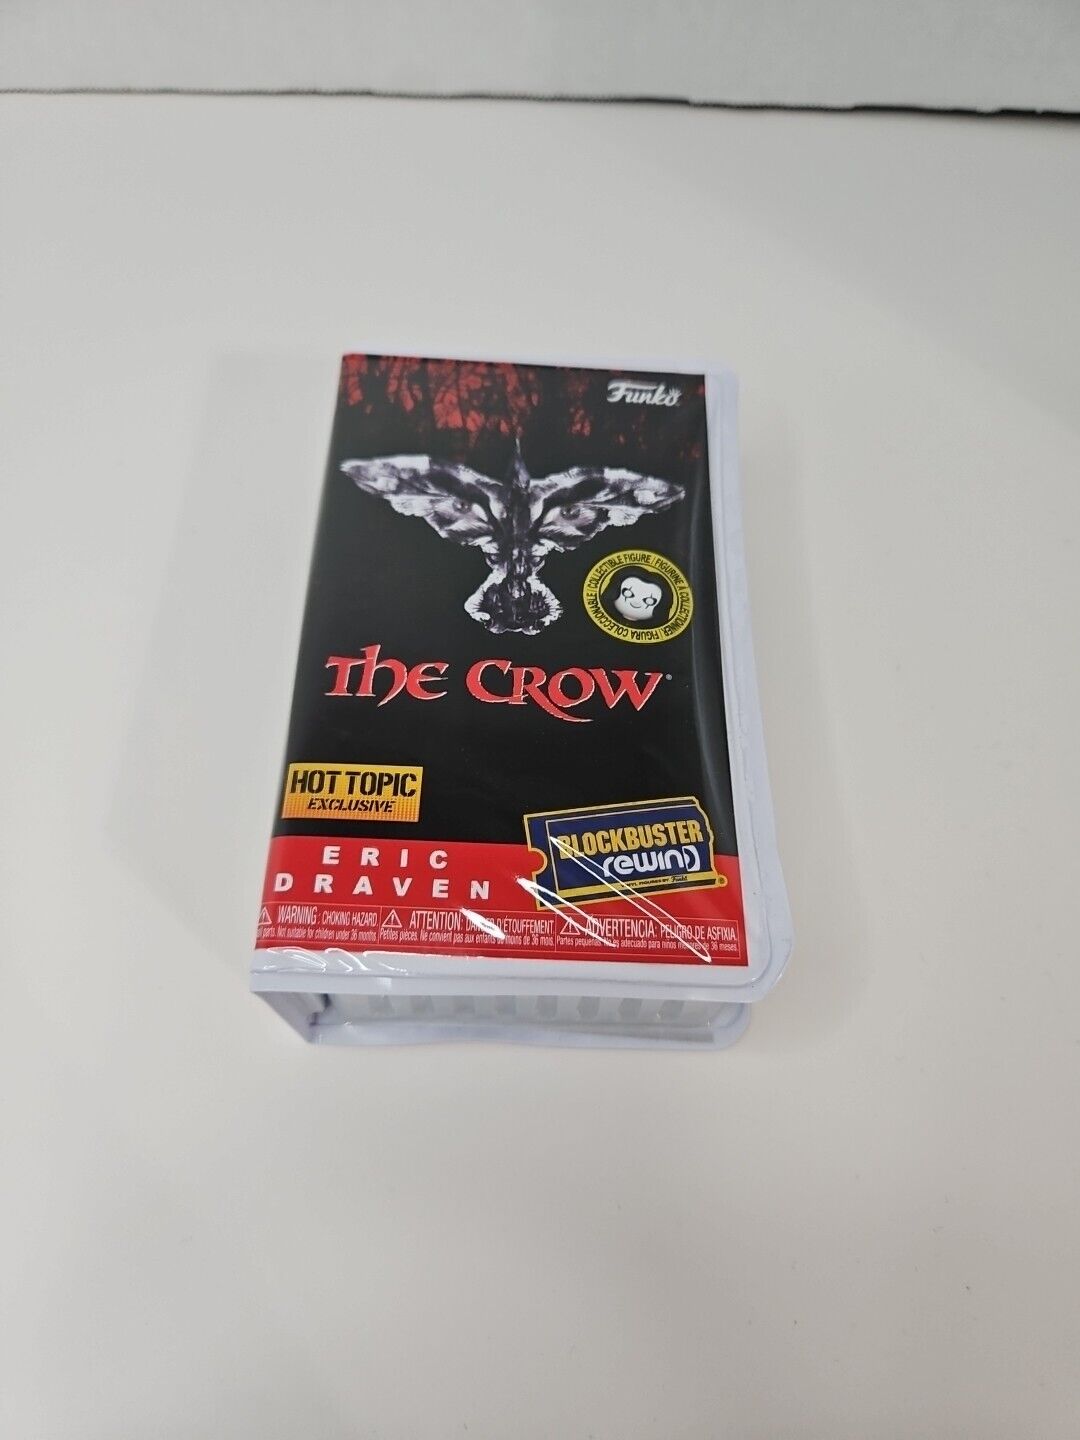 Funko BlockBuster Rewind The Crow - Eric Draven (Chase) Hot Topic Exclusive 